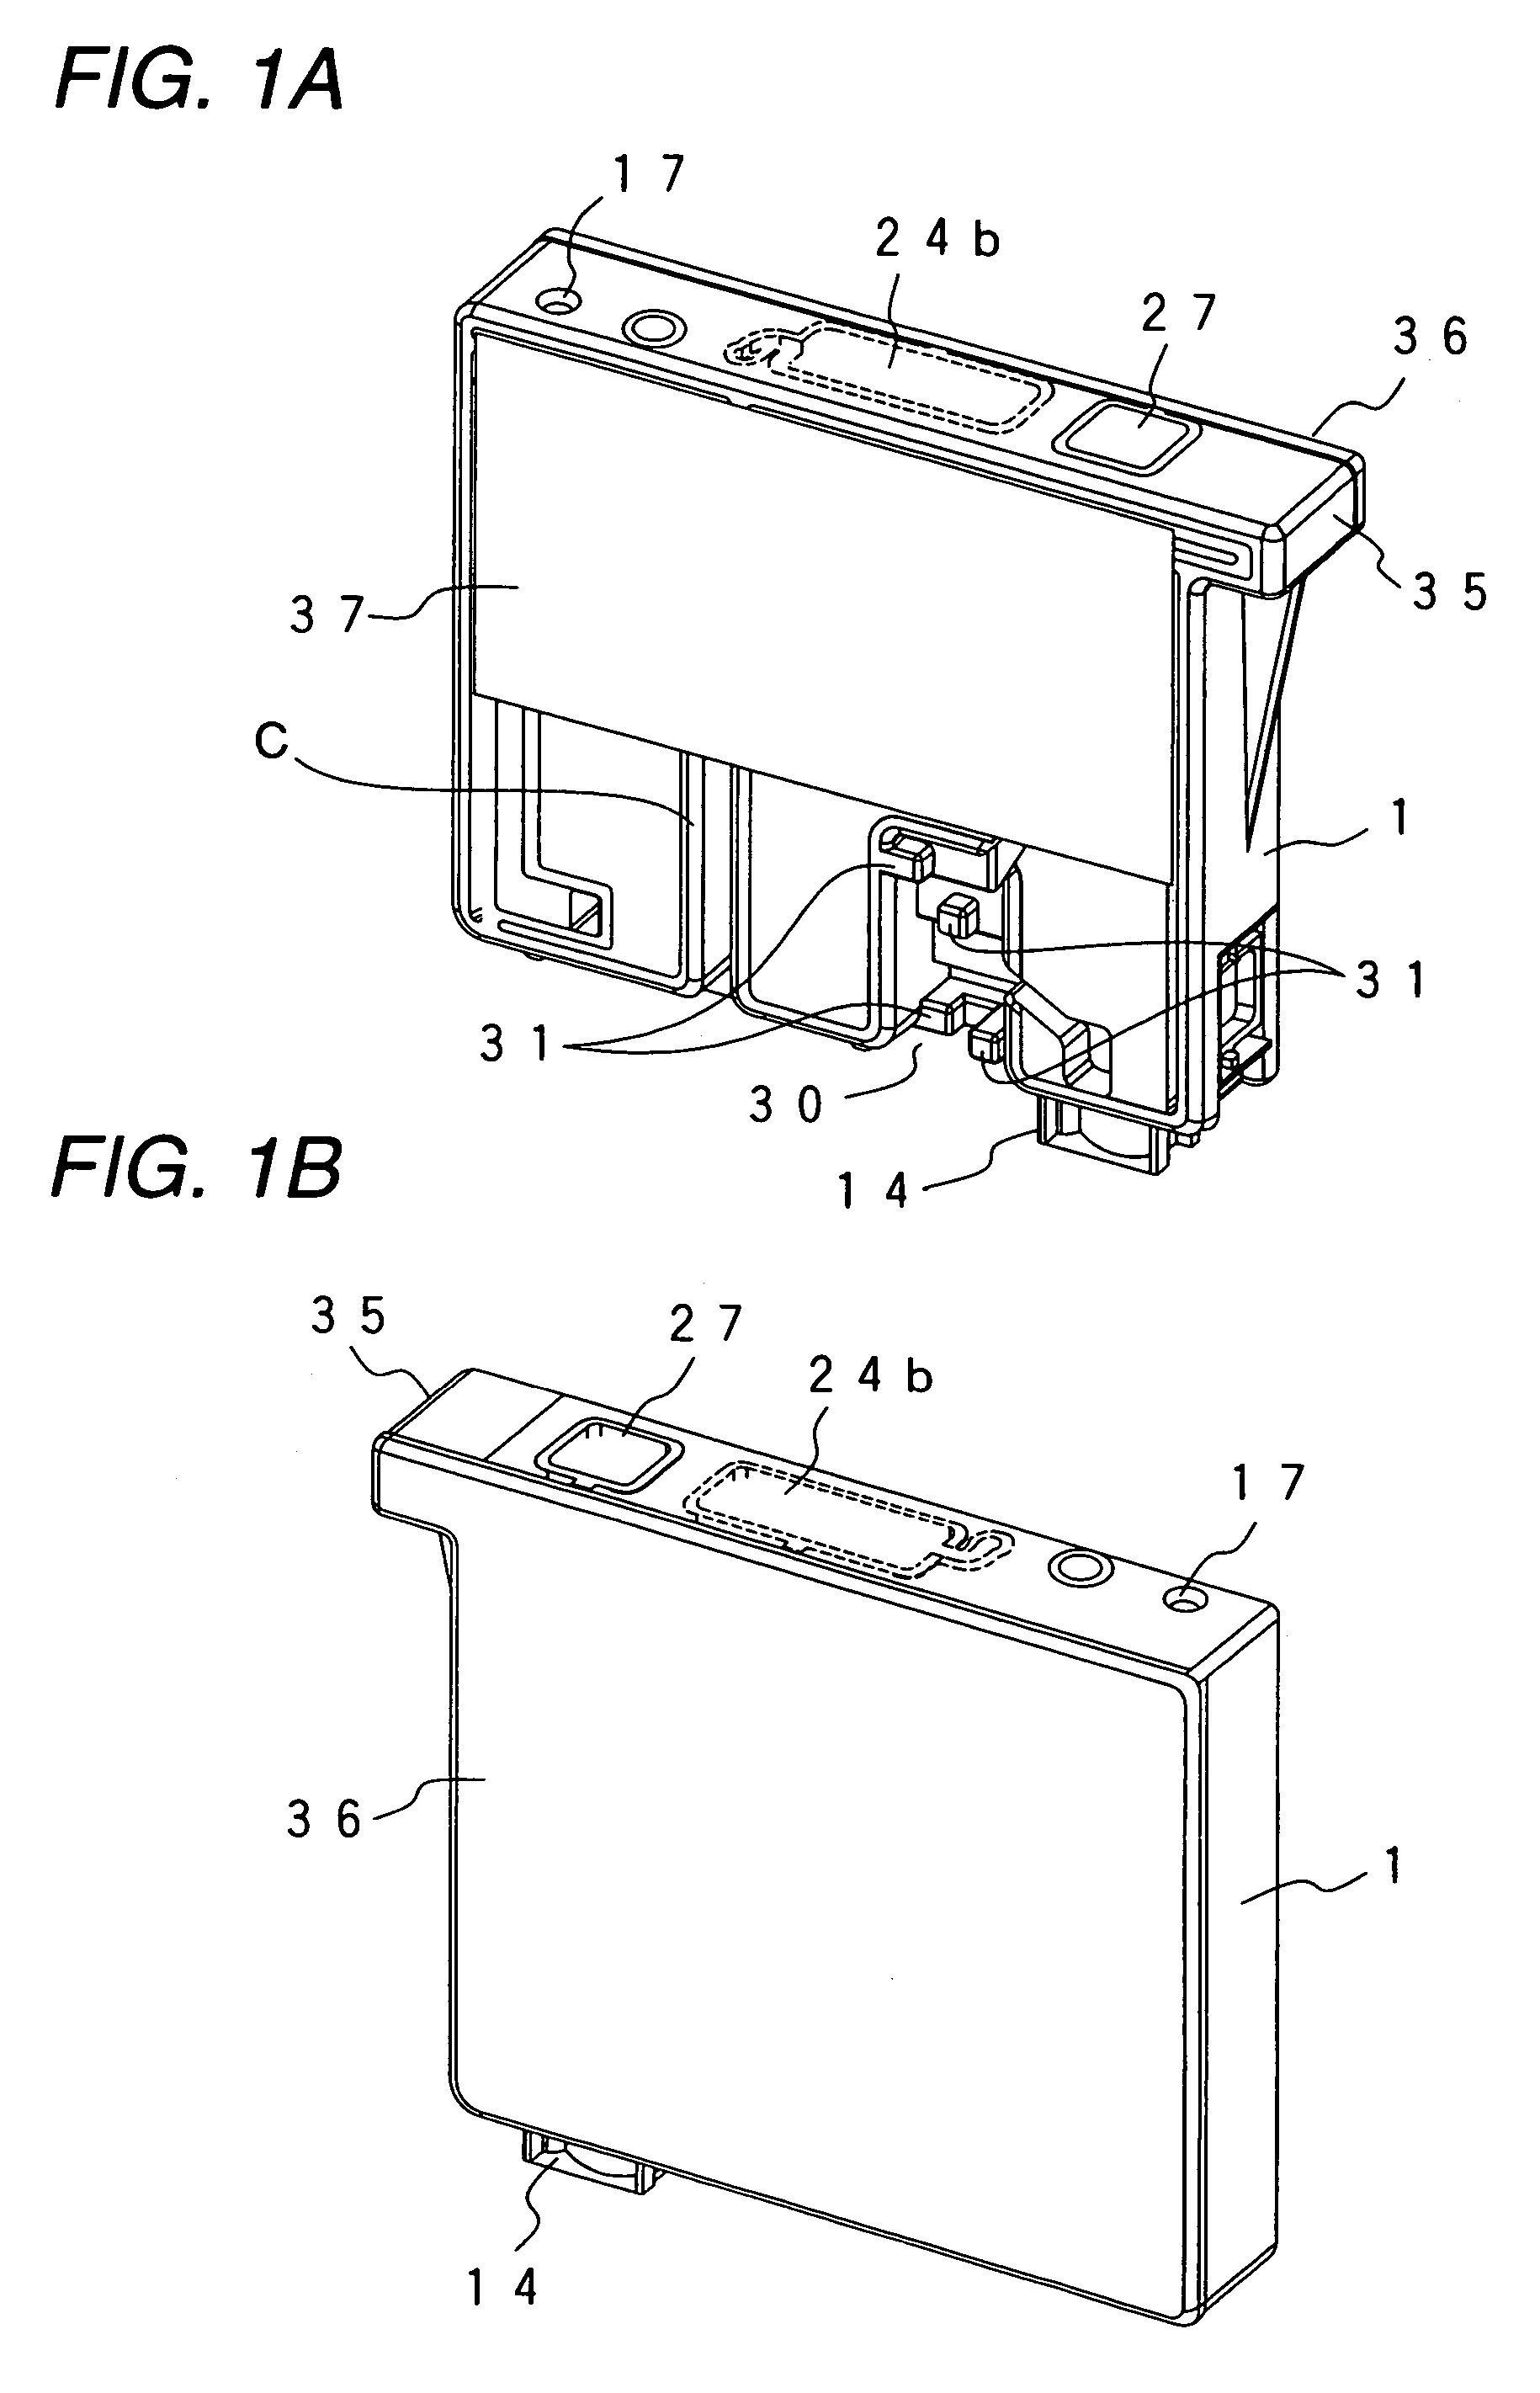 Ink-jet recording device and ink cartridge